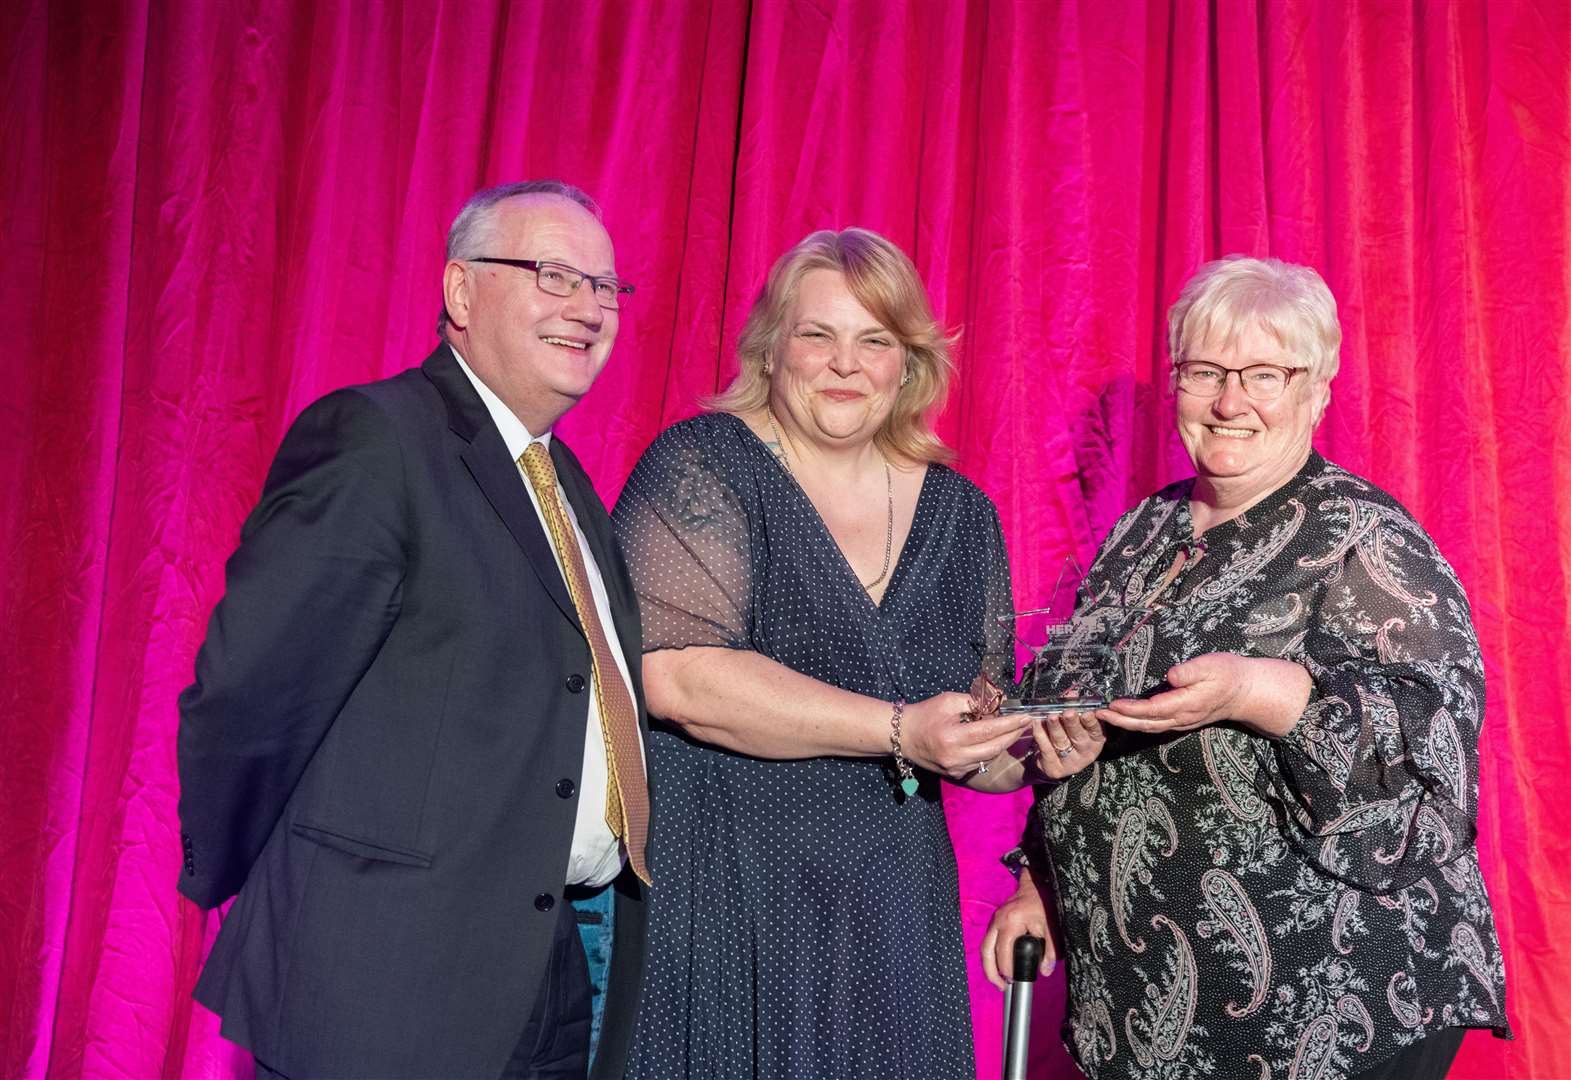 Meg Jamieson (right) and Gifford Leslie accept the Community Champion of the Year award on behalf of Buckie's Roots from Roz Cassidy, the HR Manager of Walker's Shortbread. Picture: Beth Taylor